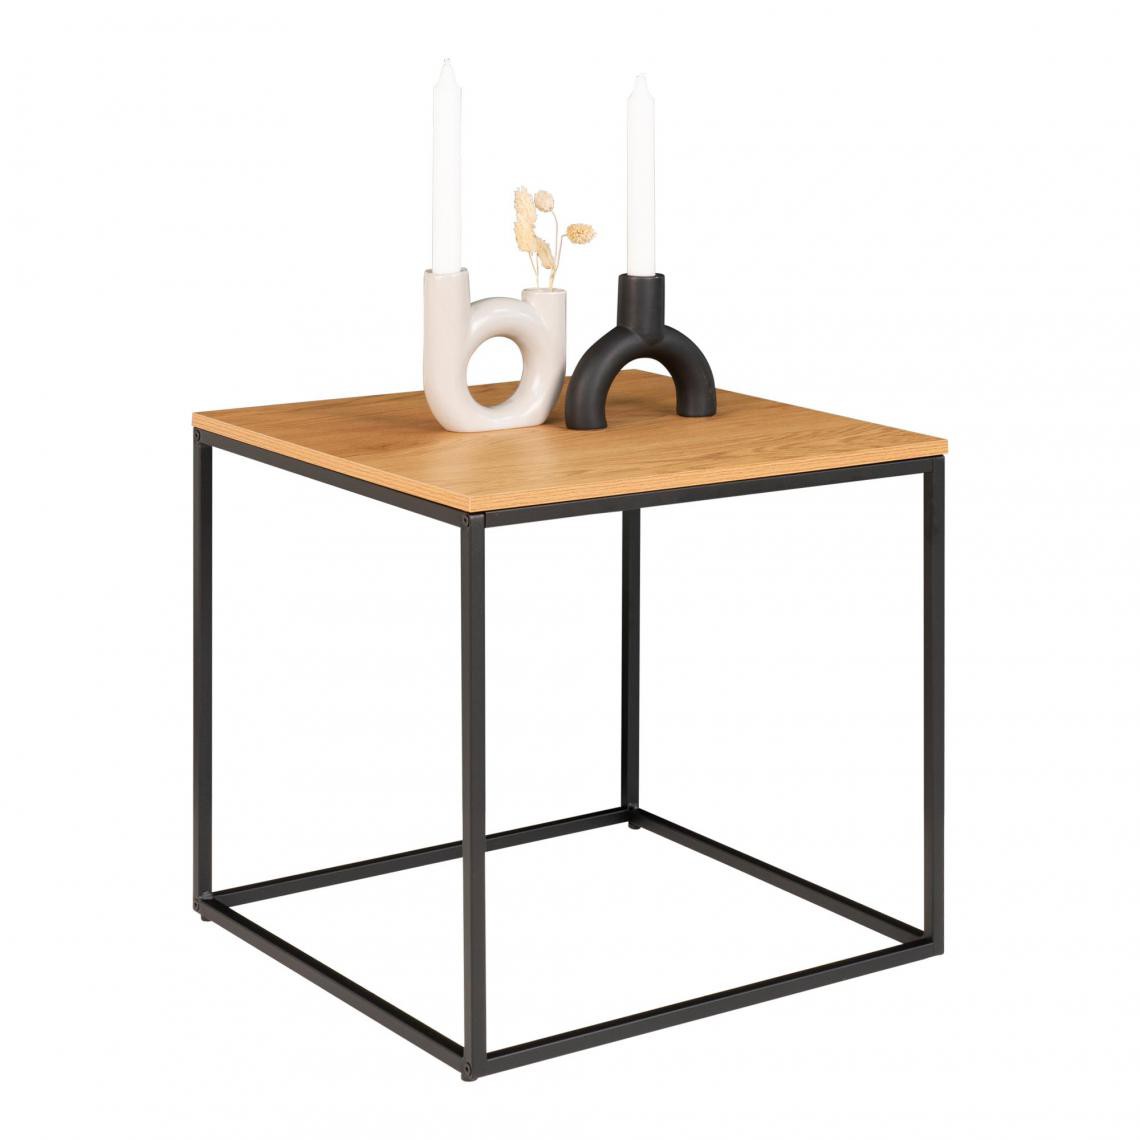 House Nordic - Table D'Appoint VITA - Tables d'appoint